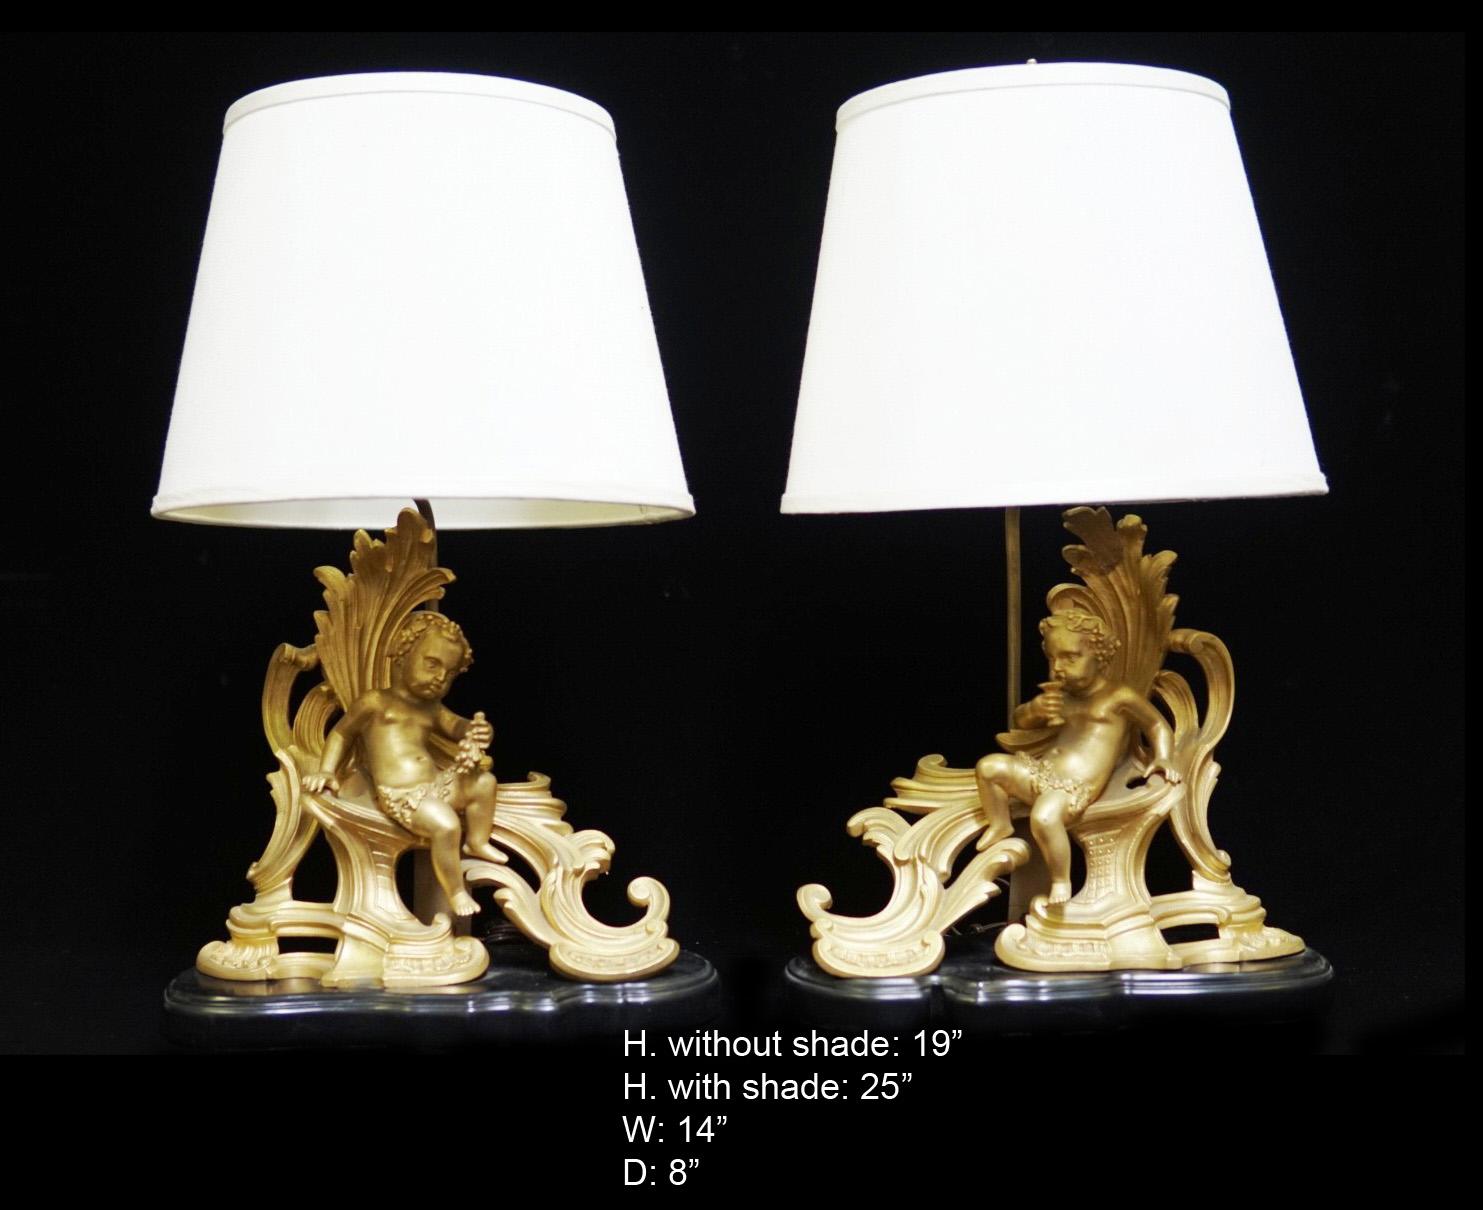 Pair of French Ormolu gilt bronze chenet mounted lamps. Each chenet is acanthus decorated with putti, raised on conforming stepped base. Electrified. 
Shades not included.

Dimensions: 
H. with shade 25